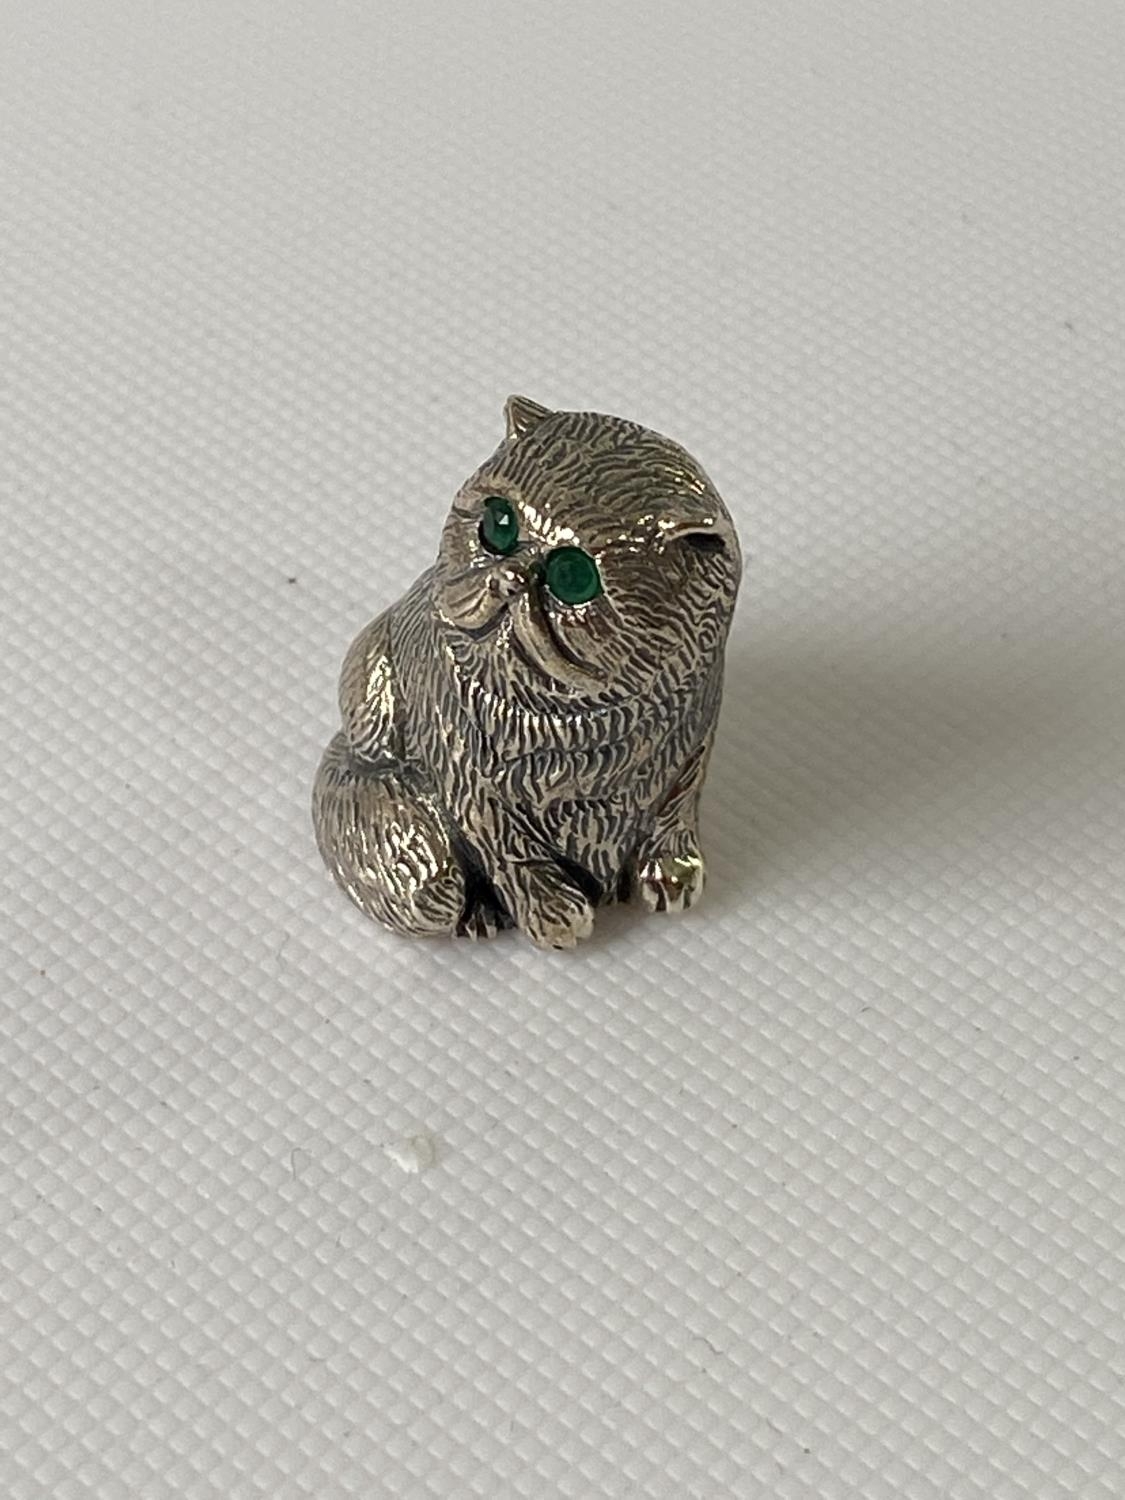 A silver figure of a cat with emerald eyes. [2.3CM IN HEIGHT] - Image 8 of 10